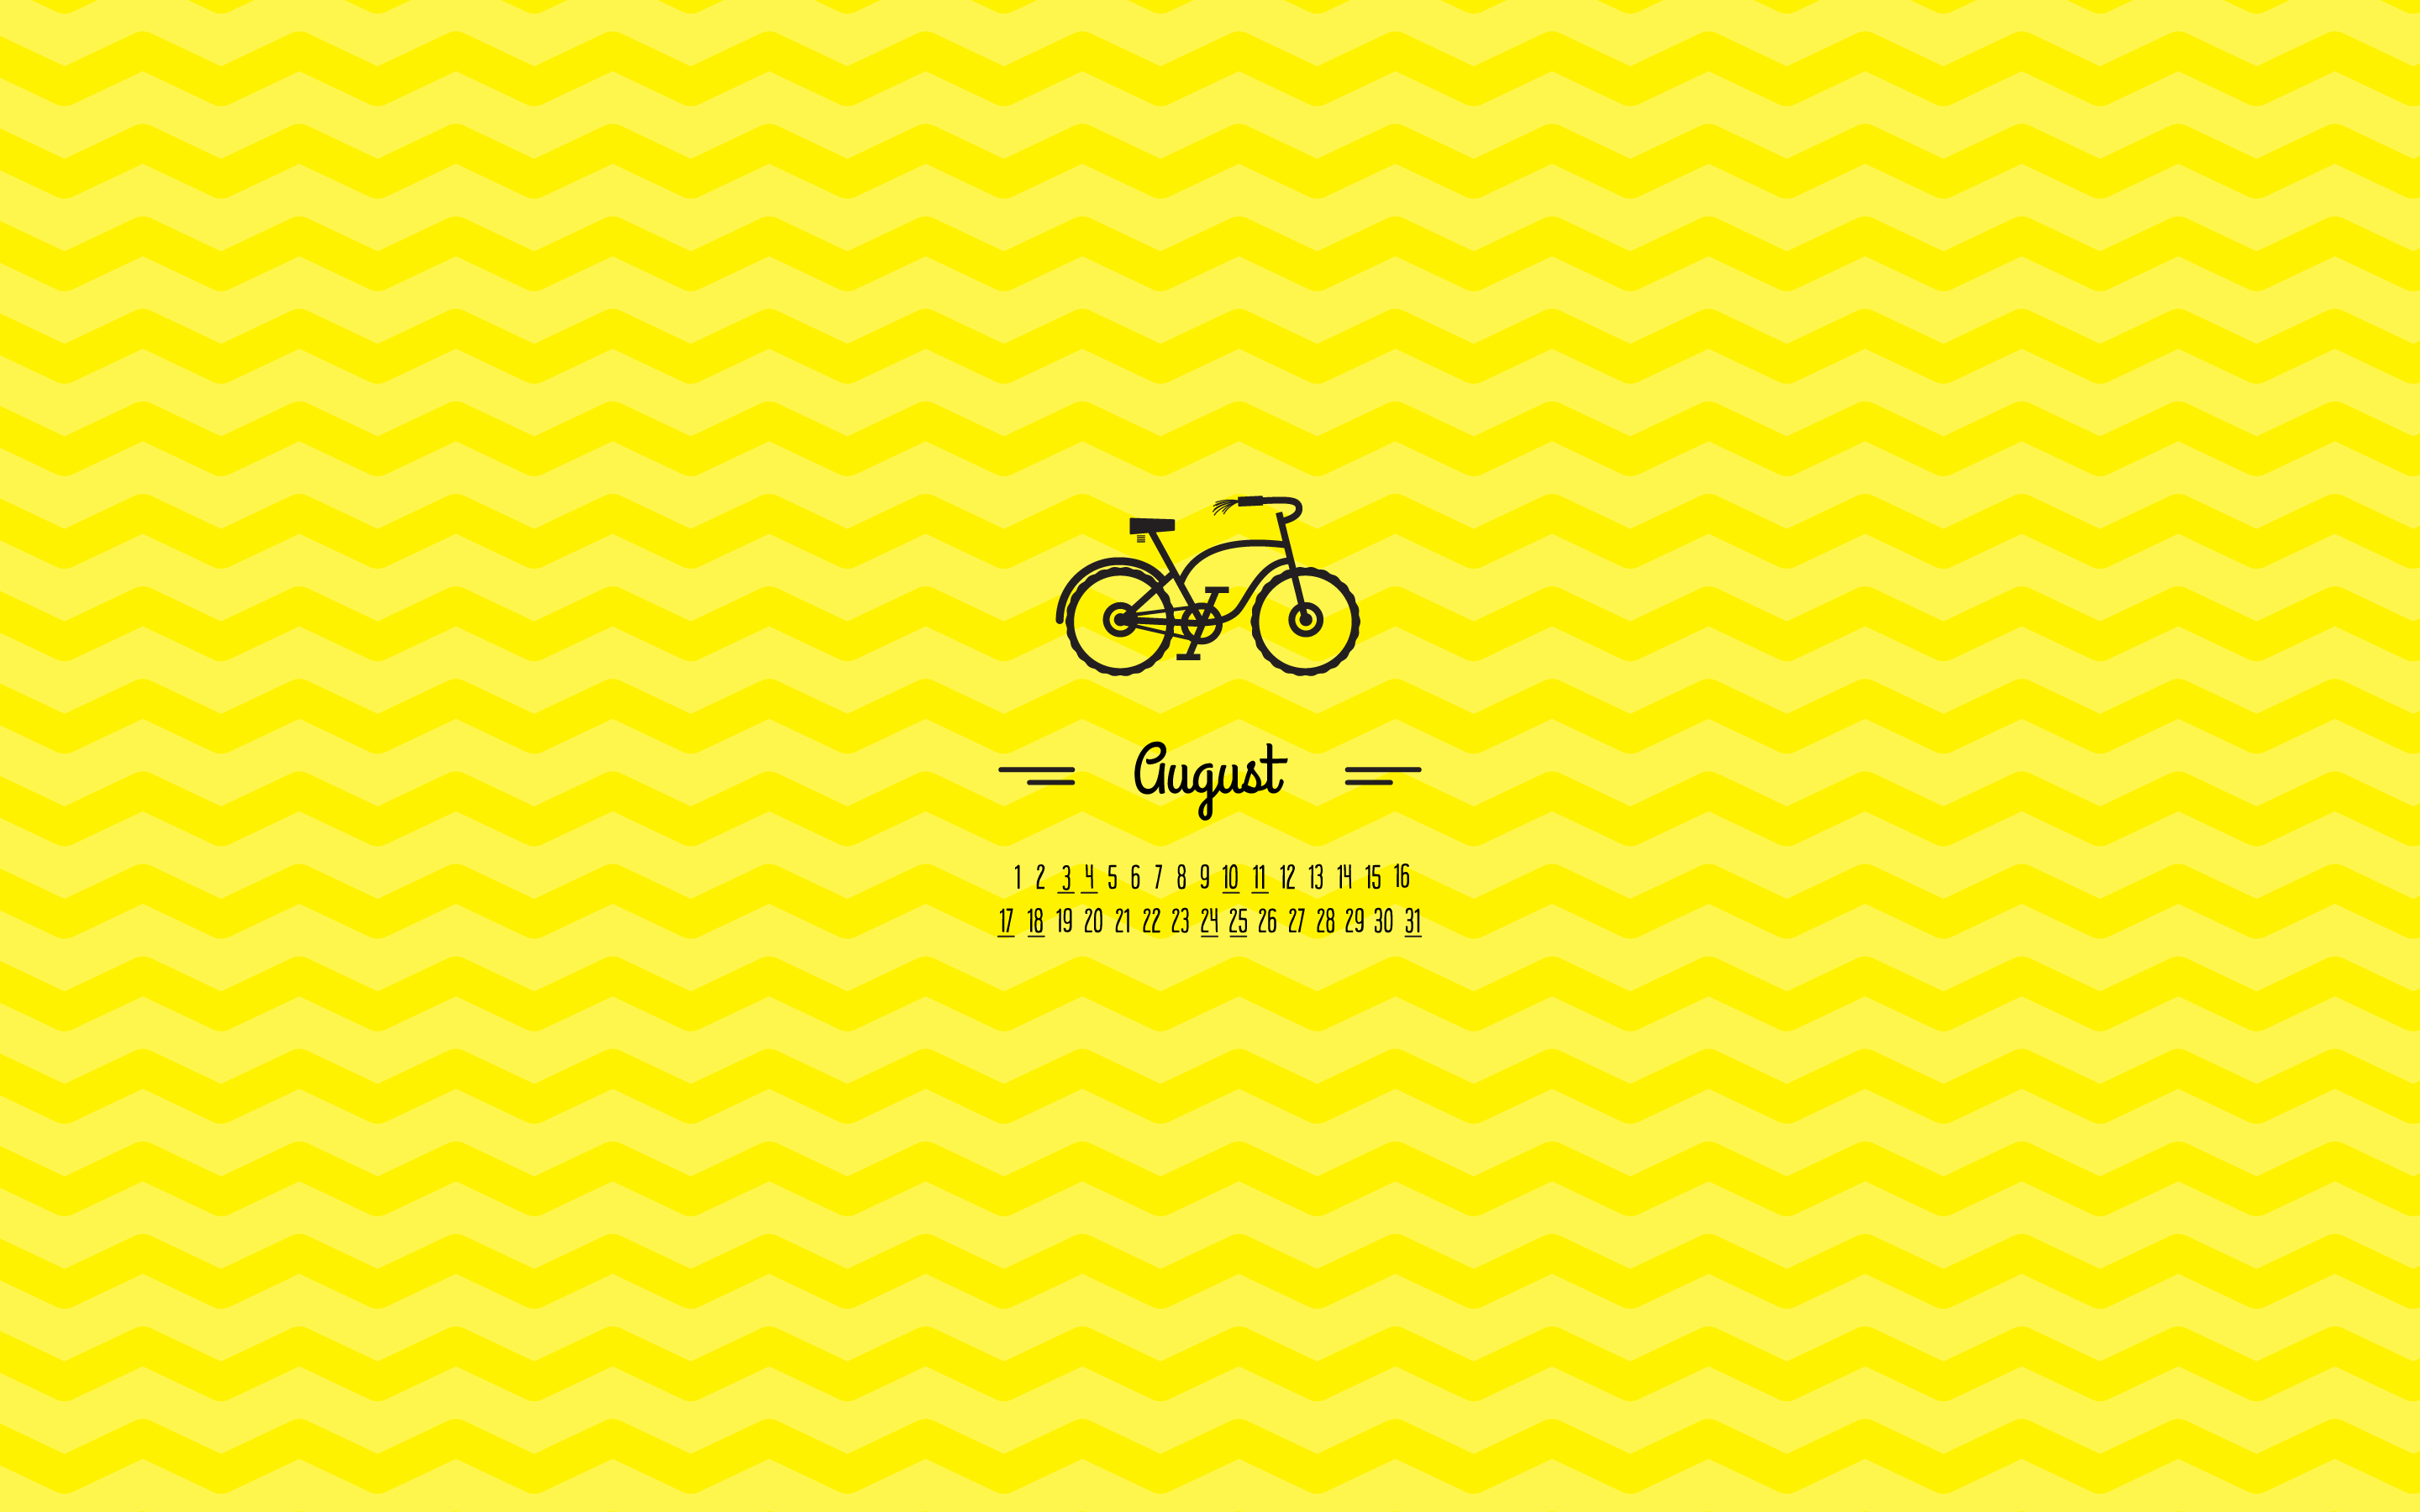 August 2016 desktop calendar wallpaper with a bicycle on a yellow background - August